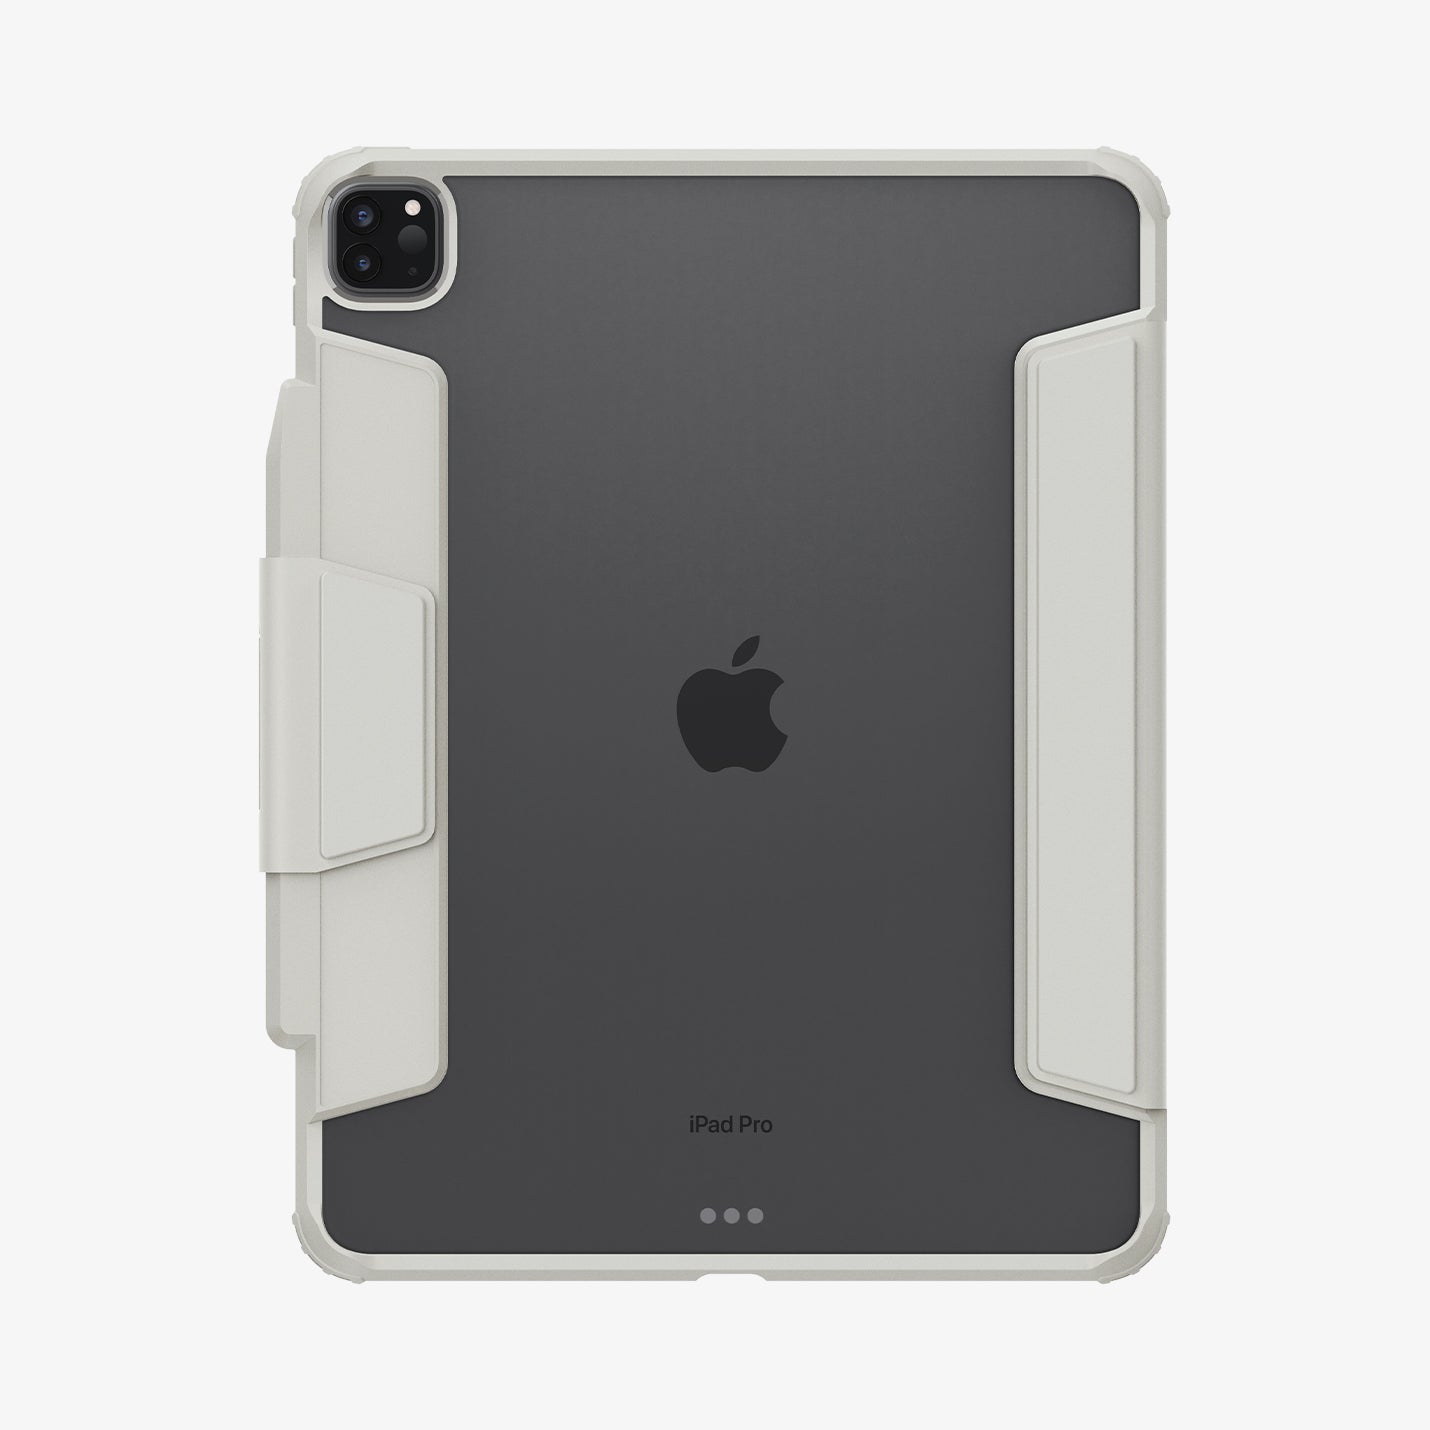 ACS07014 - iPad Pro 12.9-inch Case Air Skin Pro in Gray showing the back